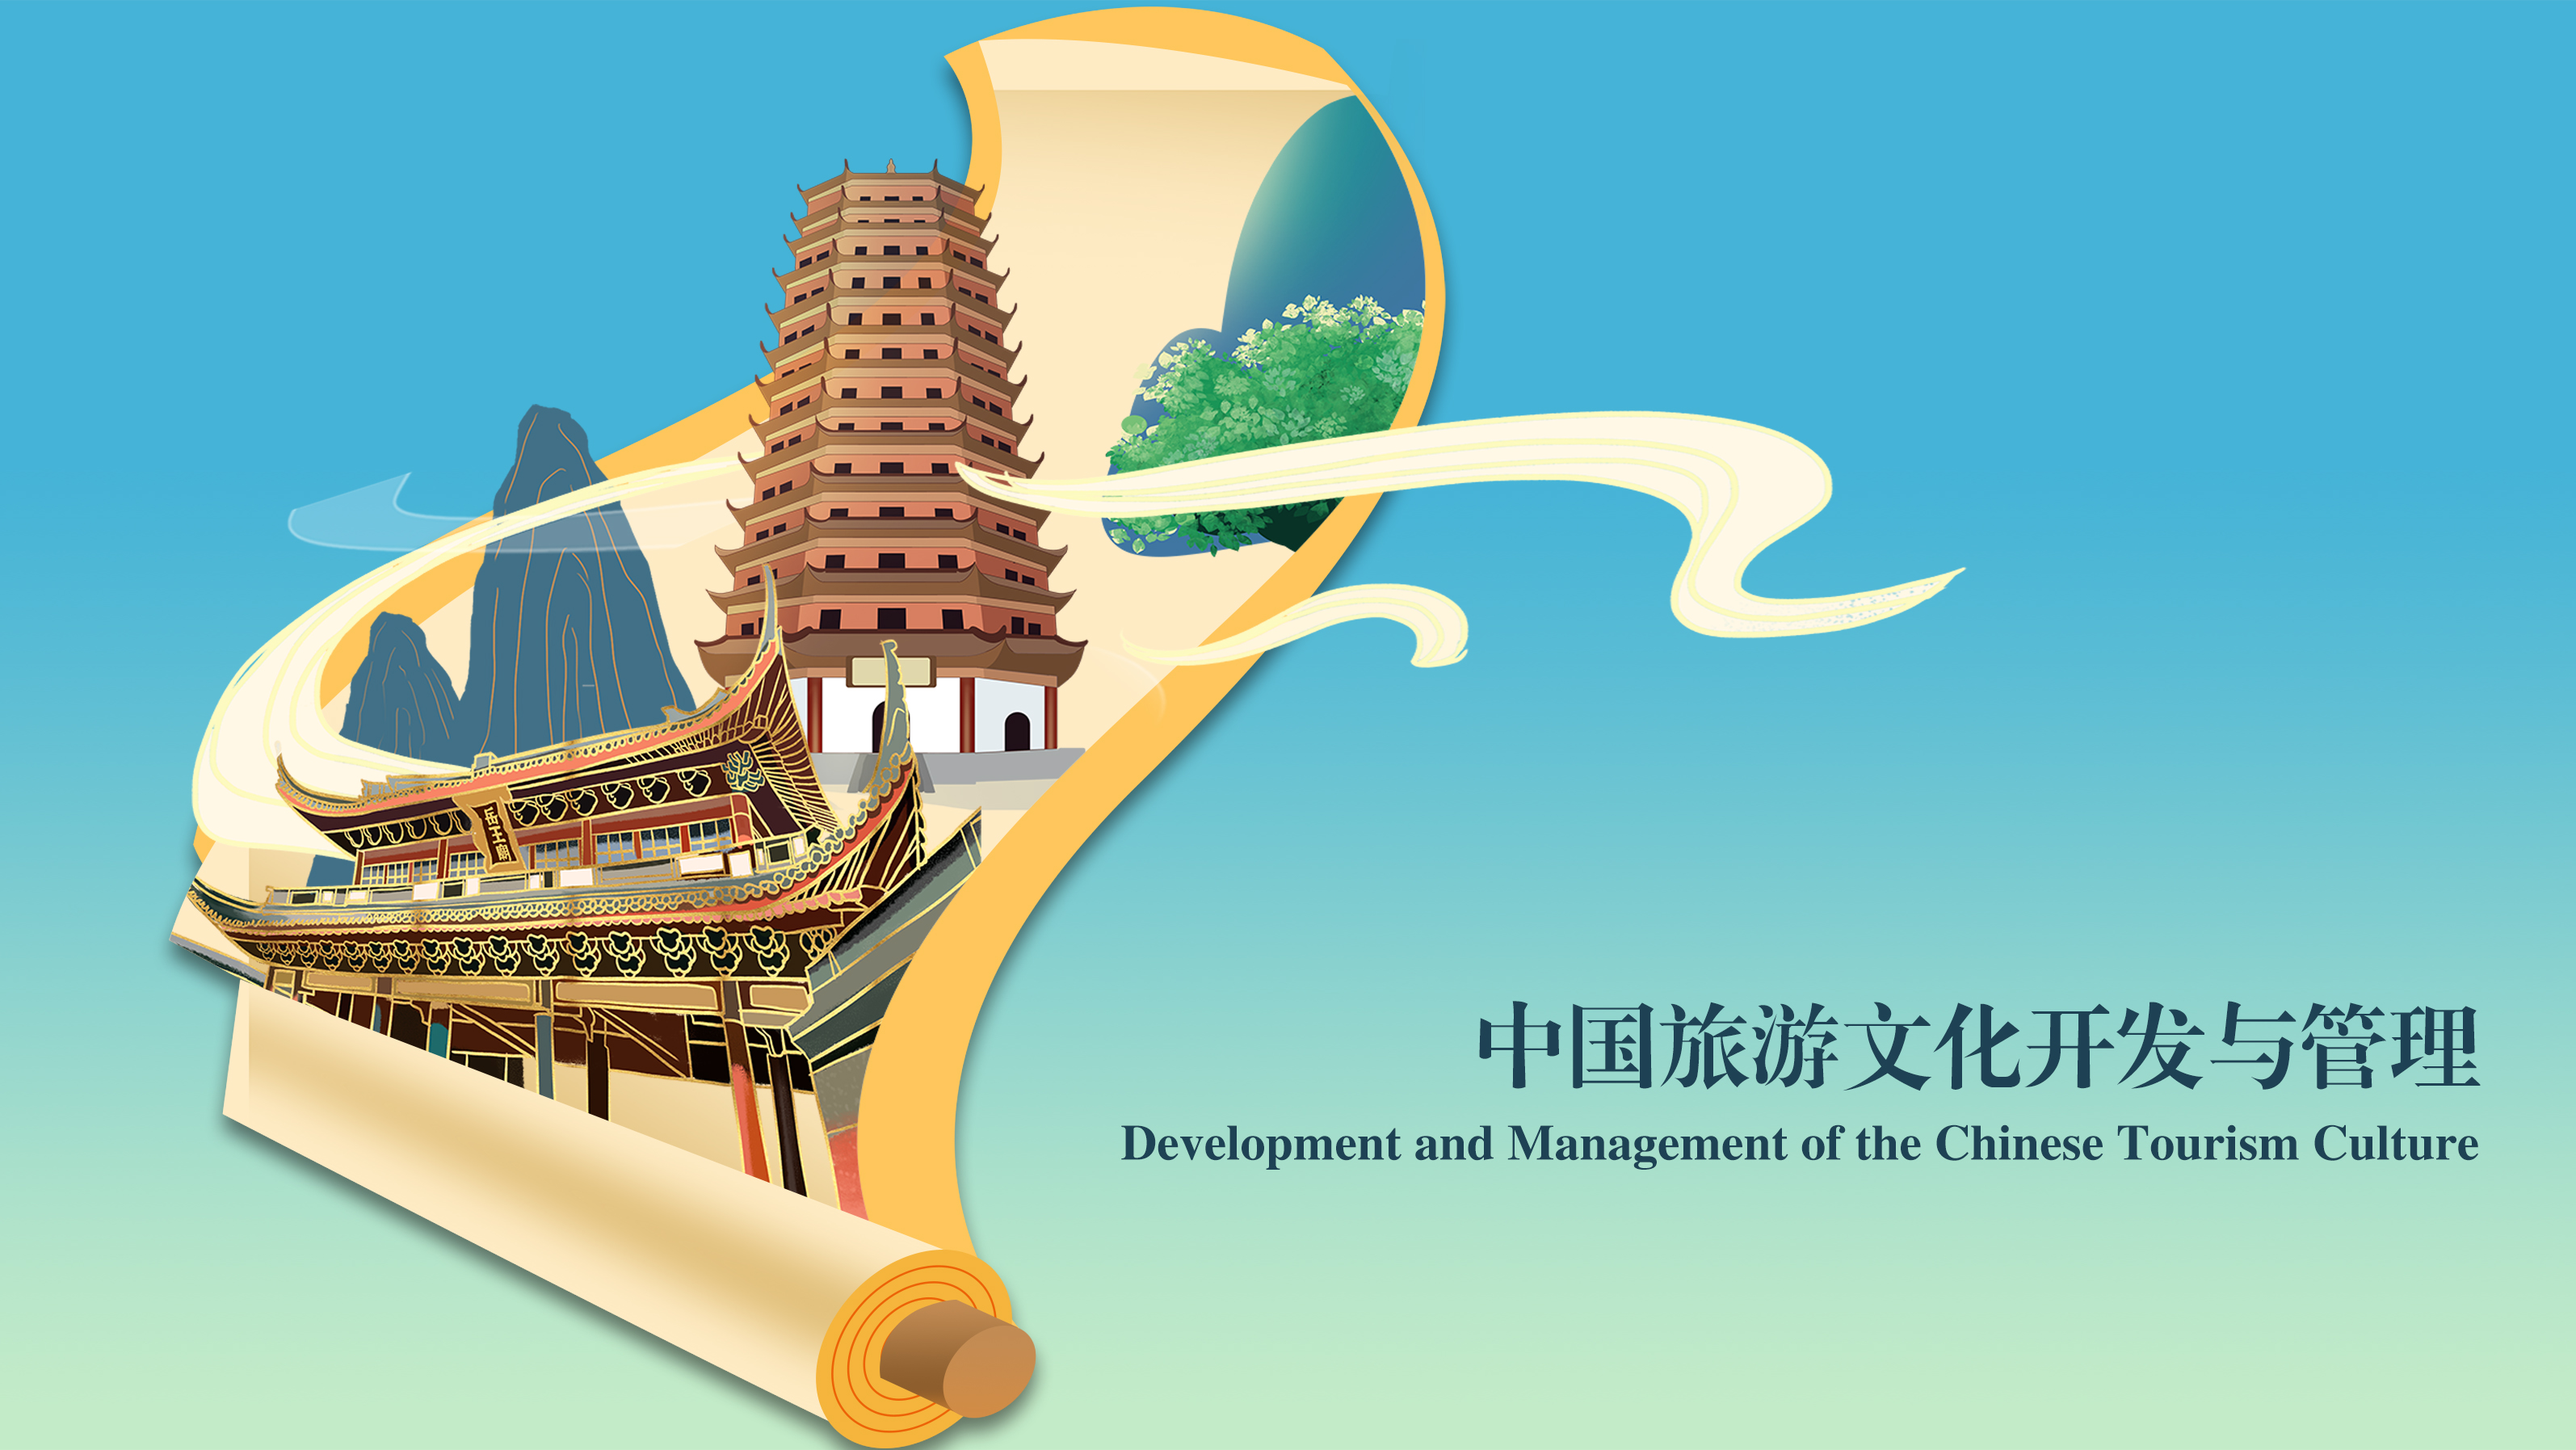 Development and Management of the Chinese Tourism Culture